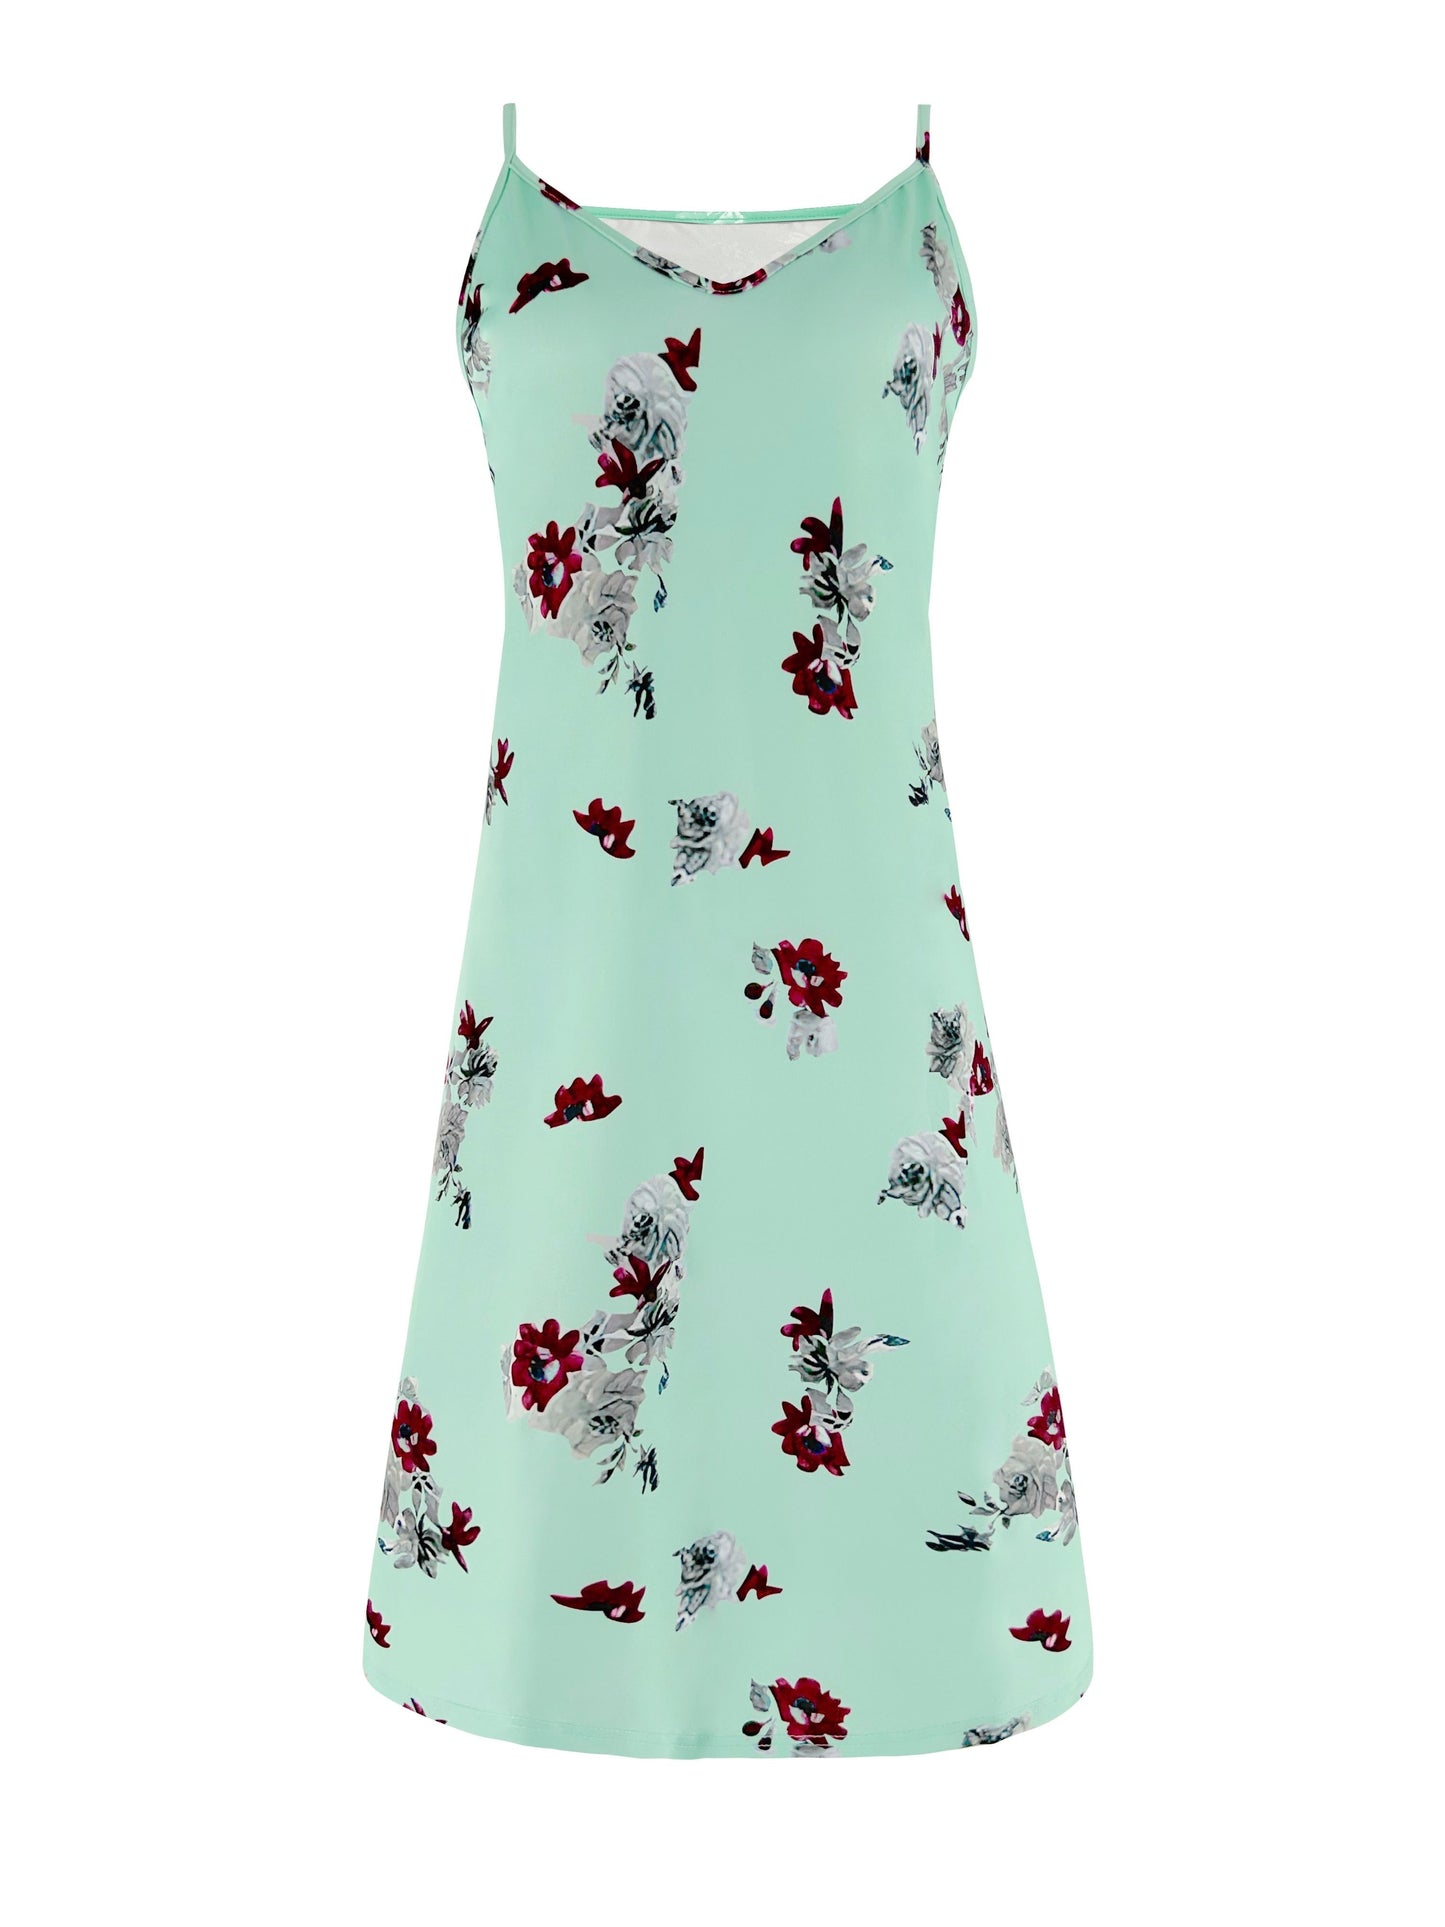 Floral Print Spaghetti Dress, Casual Backless Cami Dress For Summer, Women's Clothing